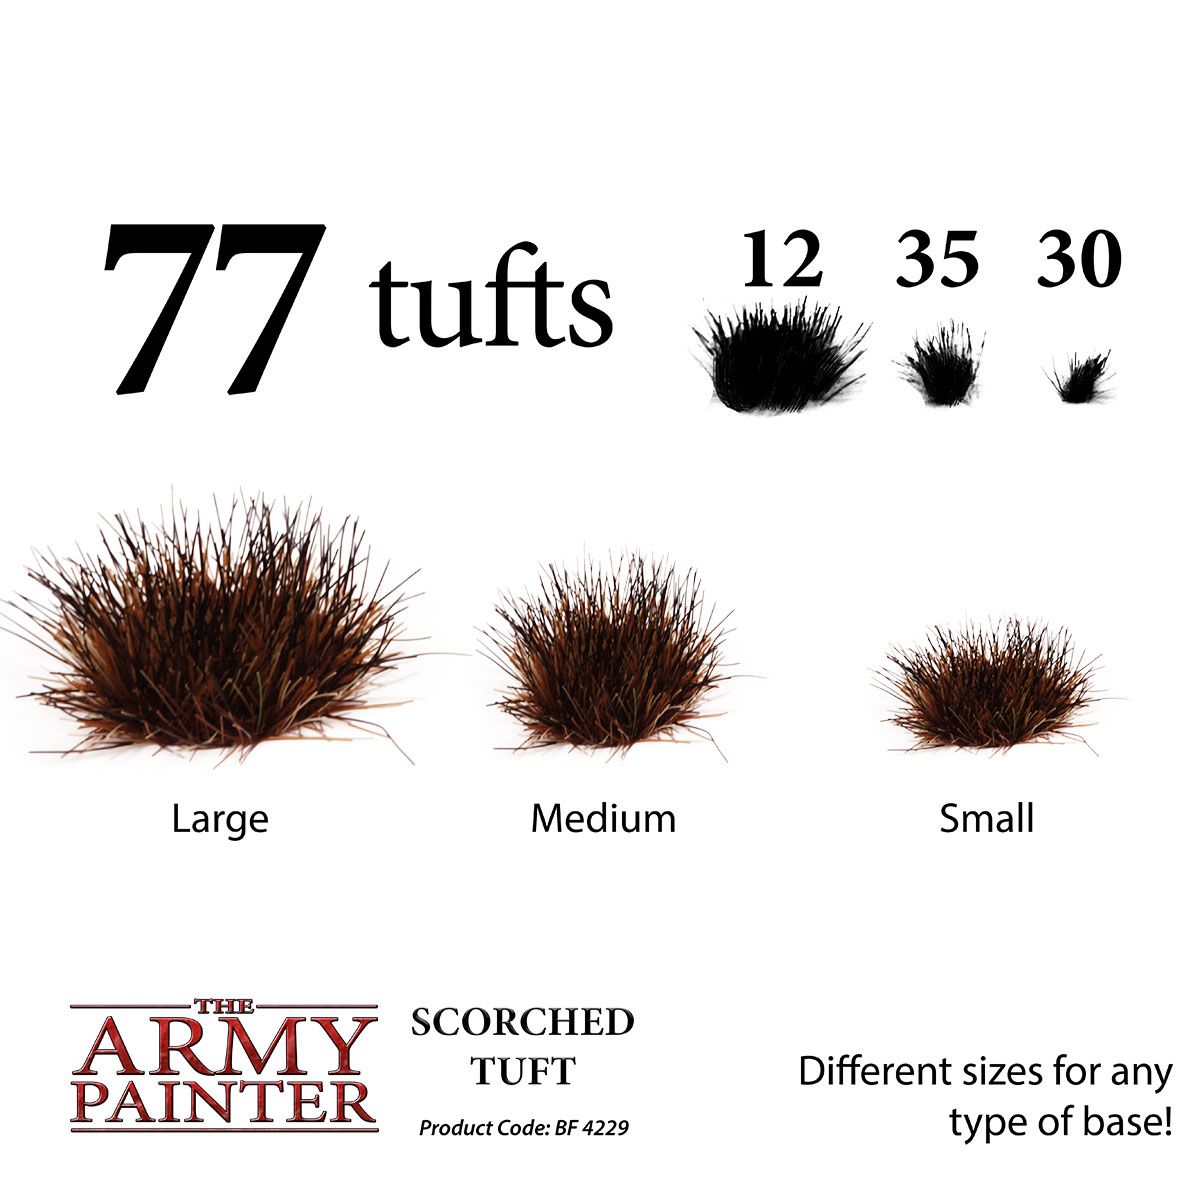 Scorched Tufts (The Army Painter)